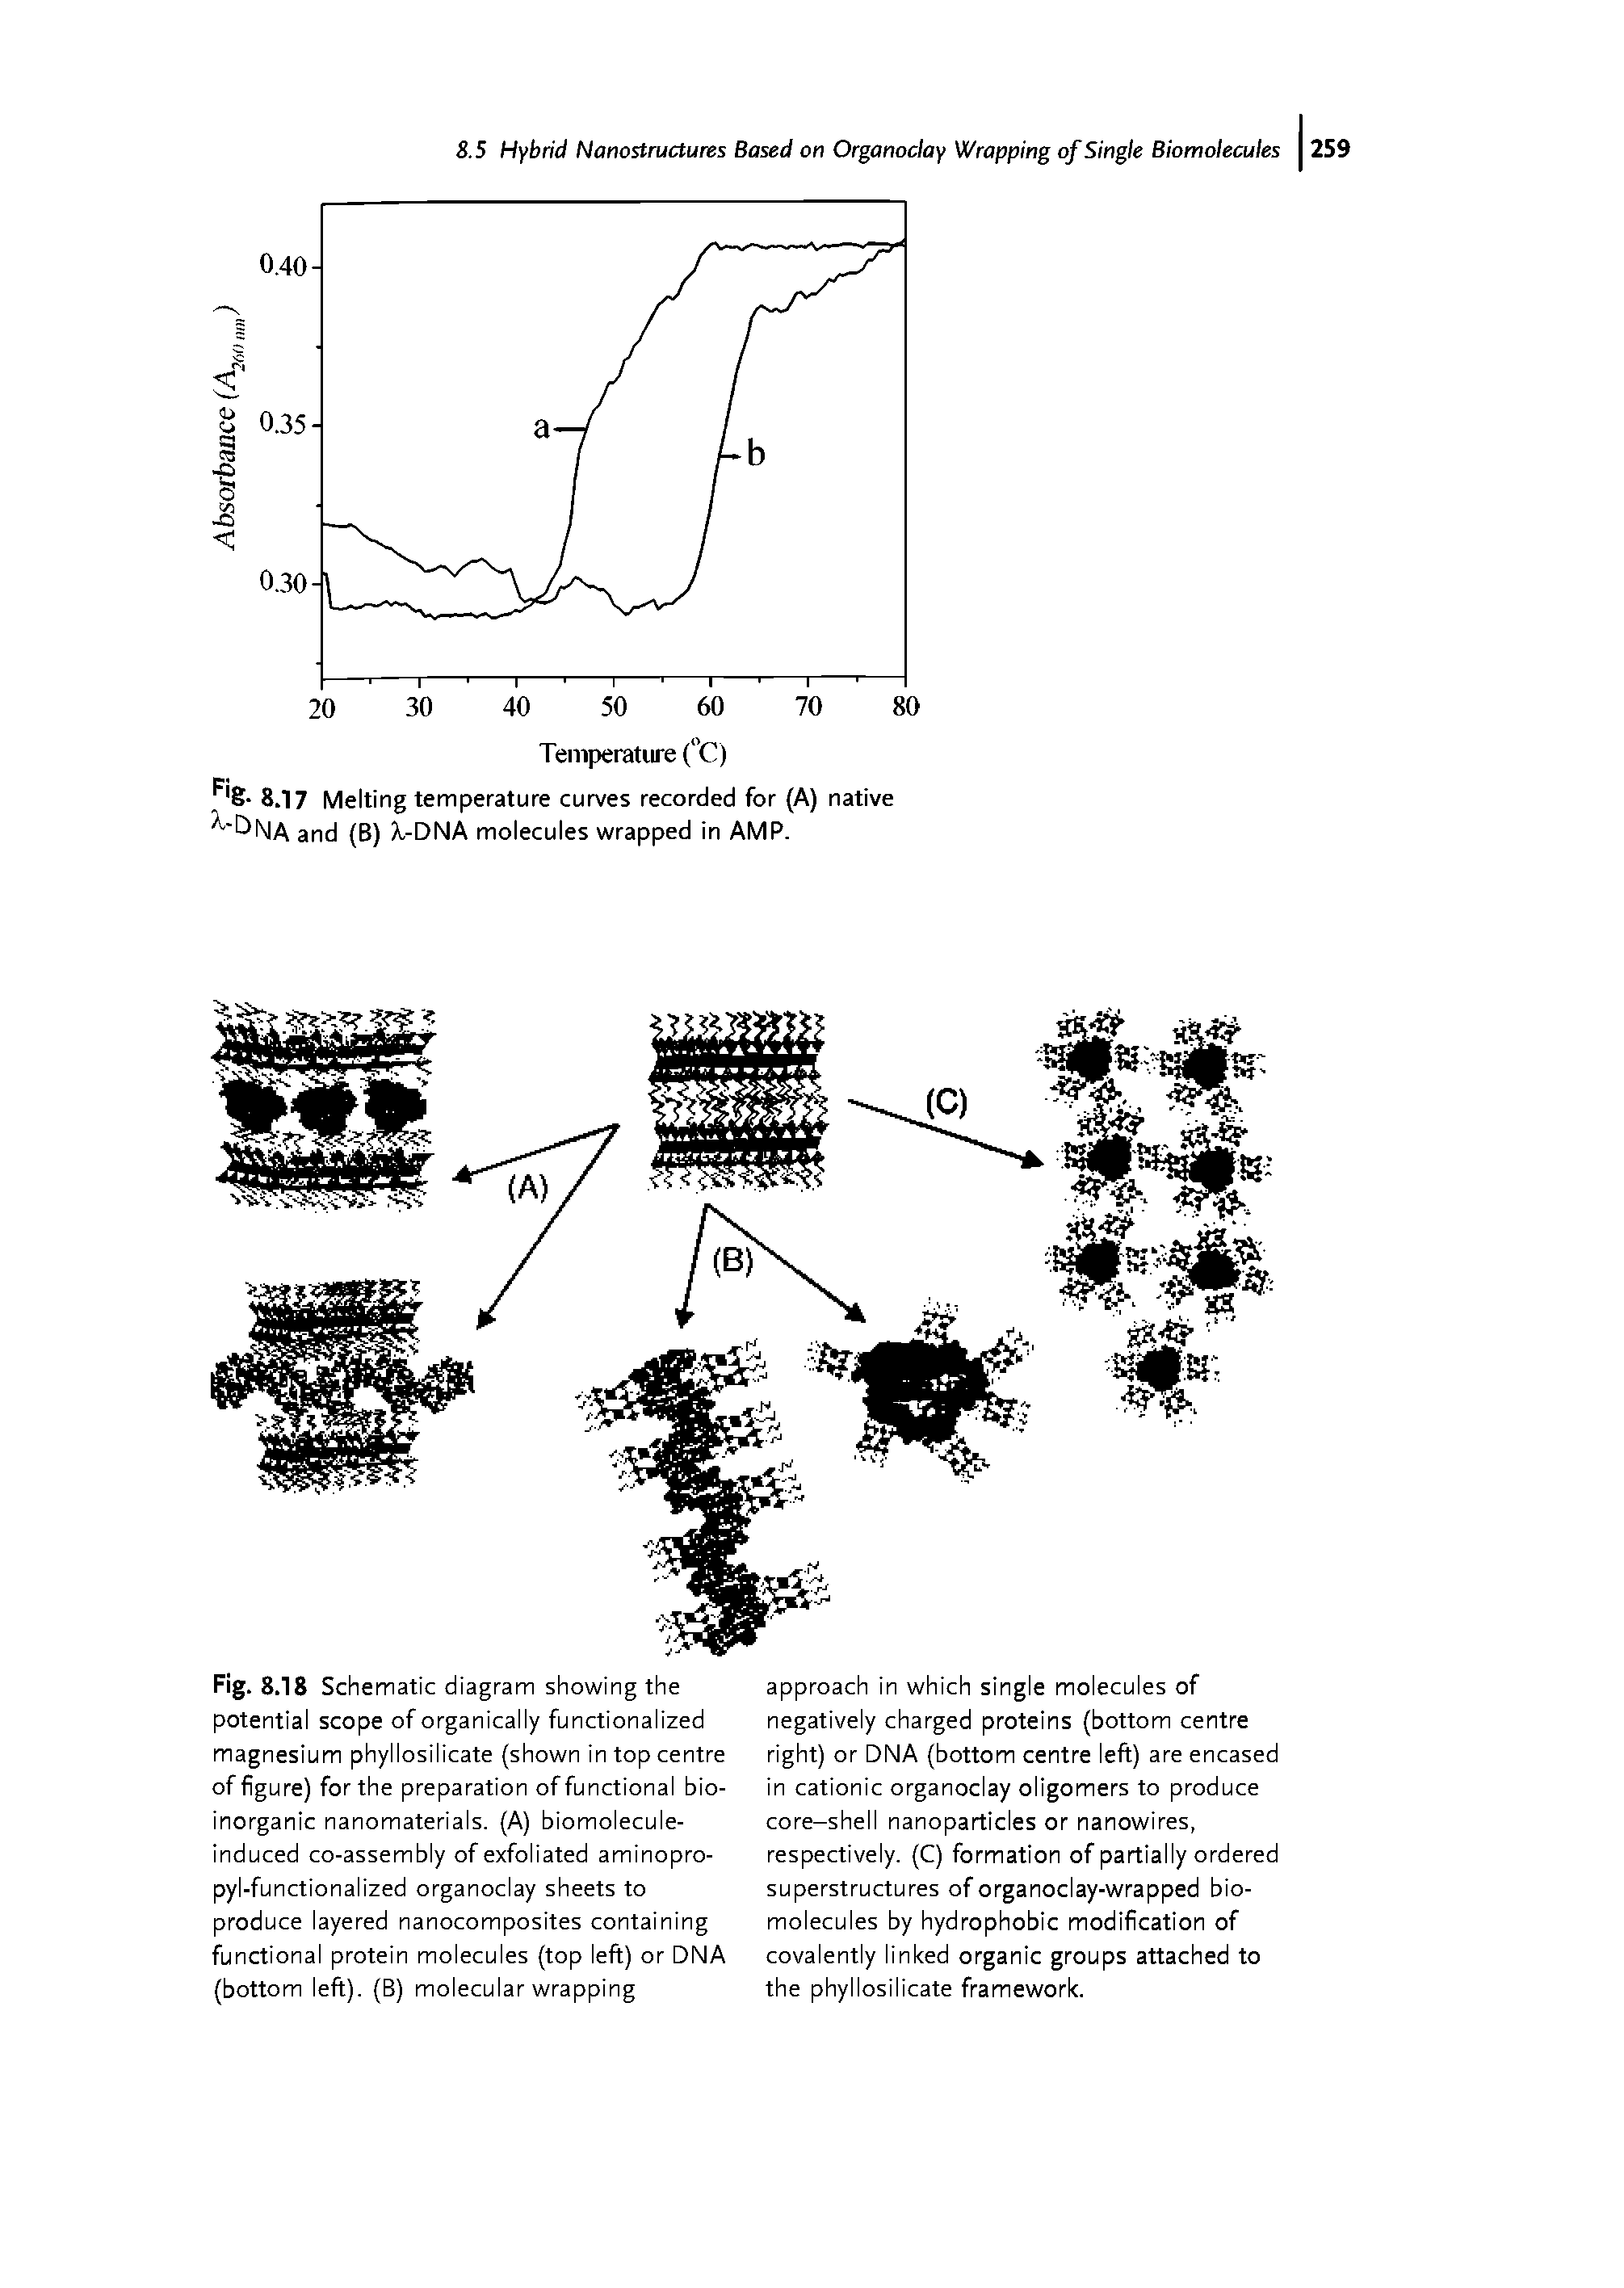 Fig. 8.18 Schematic diagram showing the potential scope of organically functionalized magnesium phyllosilicate (shown in top centre of figure) for the preparation of functional bioinorganic nanomaterials. (A) biomolecule-induced co-assembly of exfoliated aminopro-pyl-functionalized organoclay sheets to produce layered nanocomposites containing functional protein molecules (top left) or DNA (bottom left). (B) molecular wrapping...